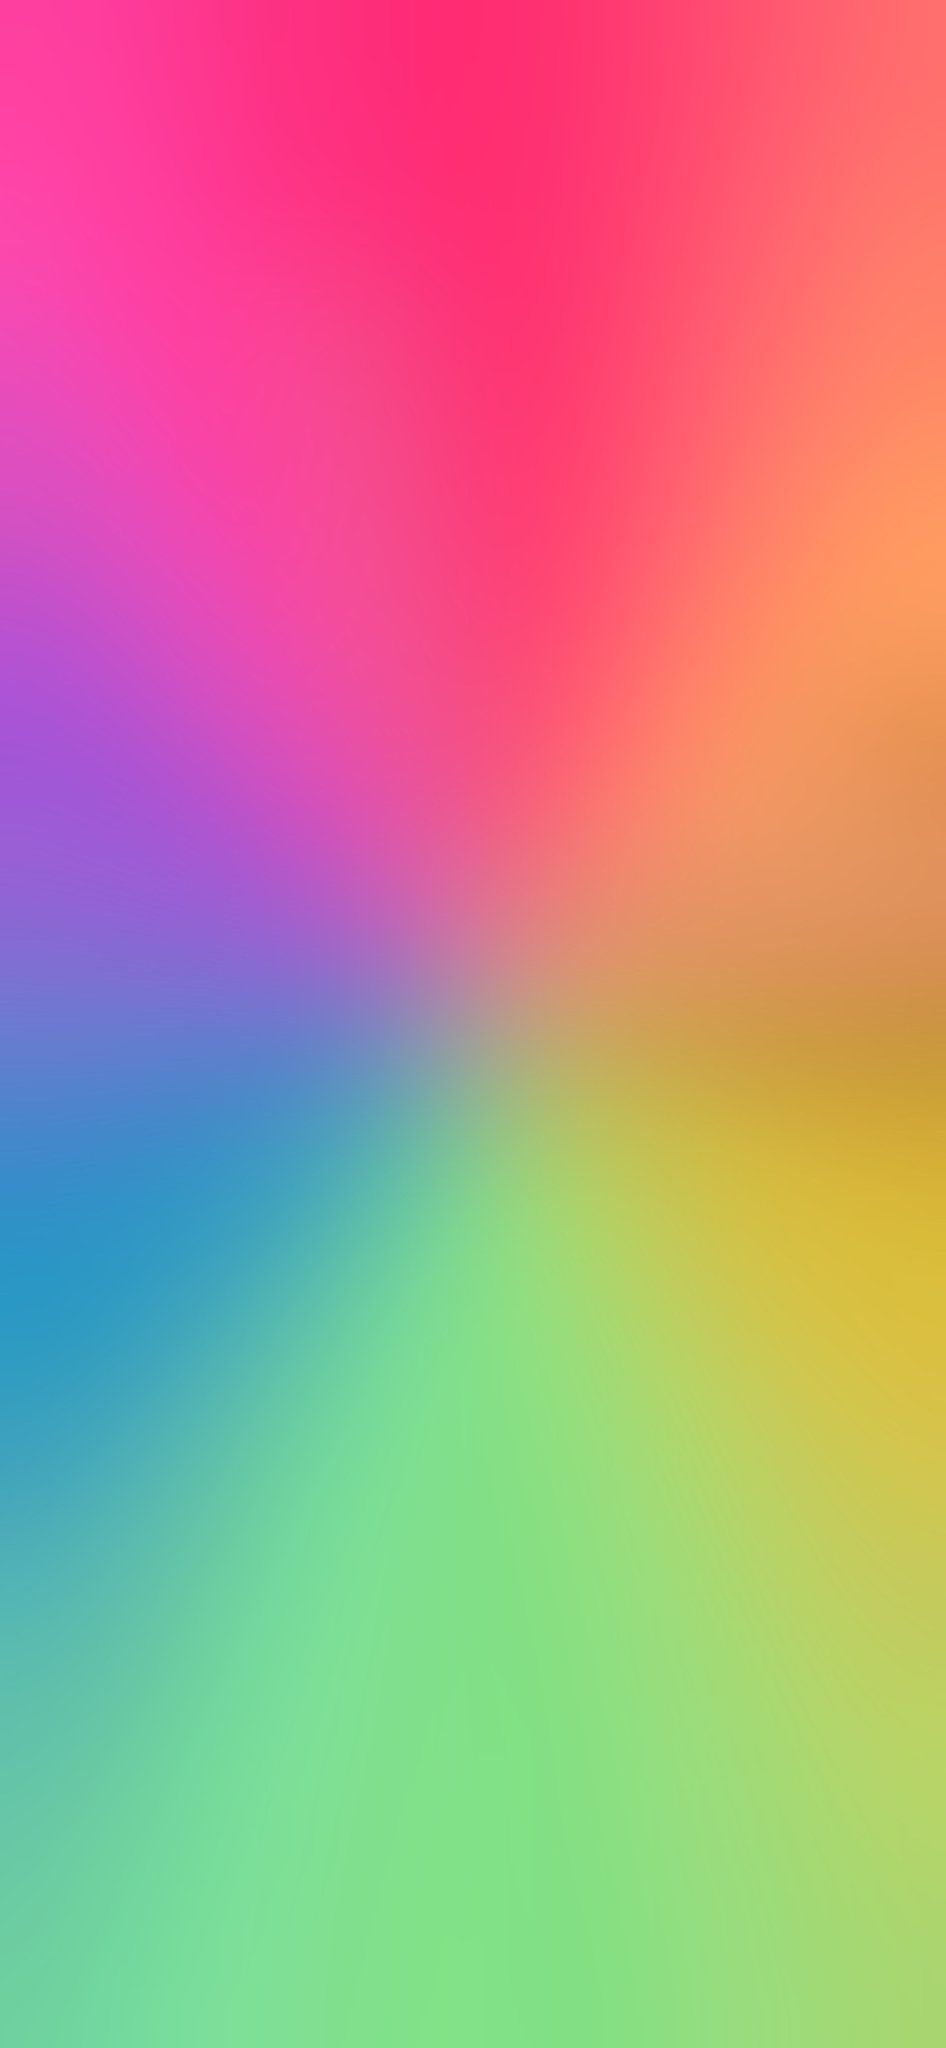 Pride Month wallpaper for your iPhone .imore.com